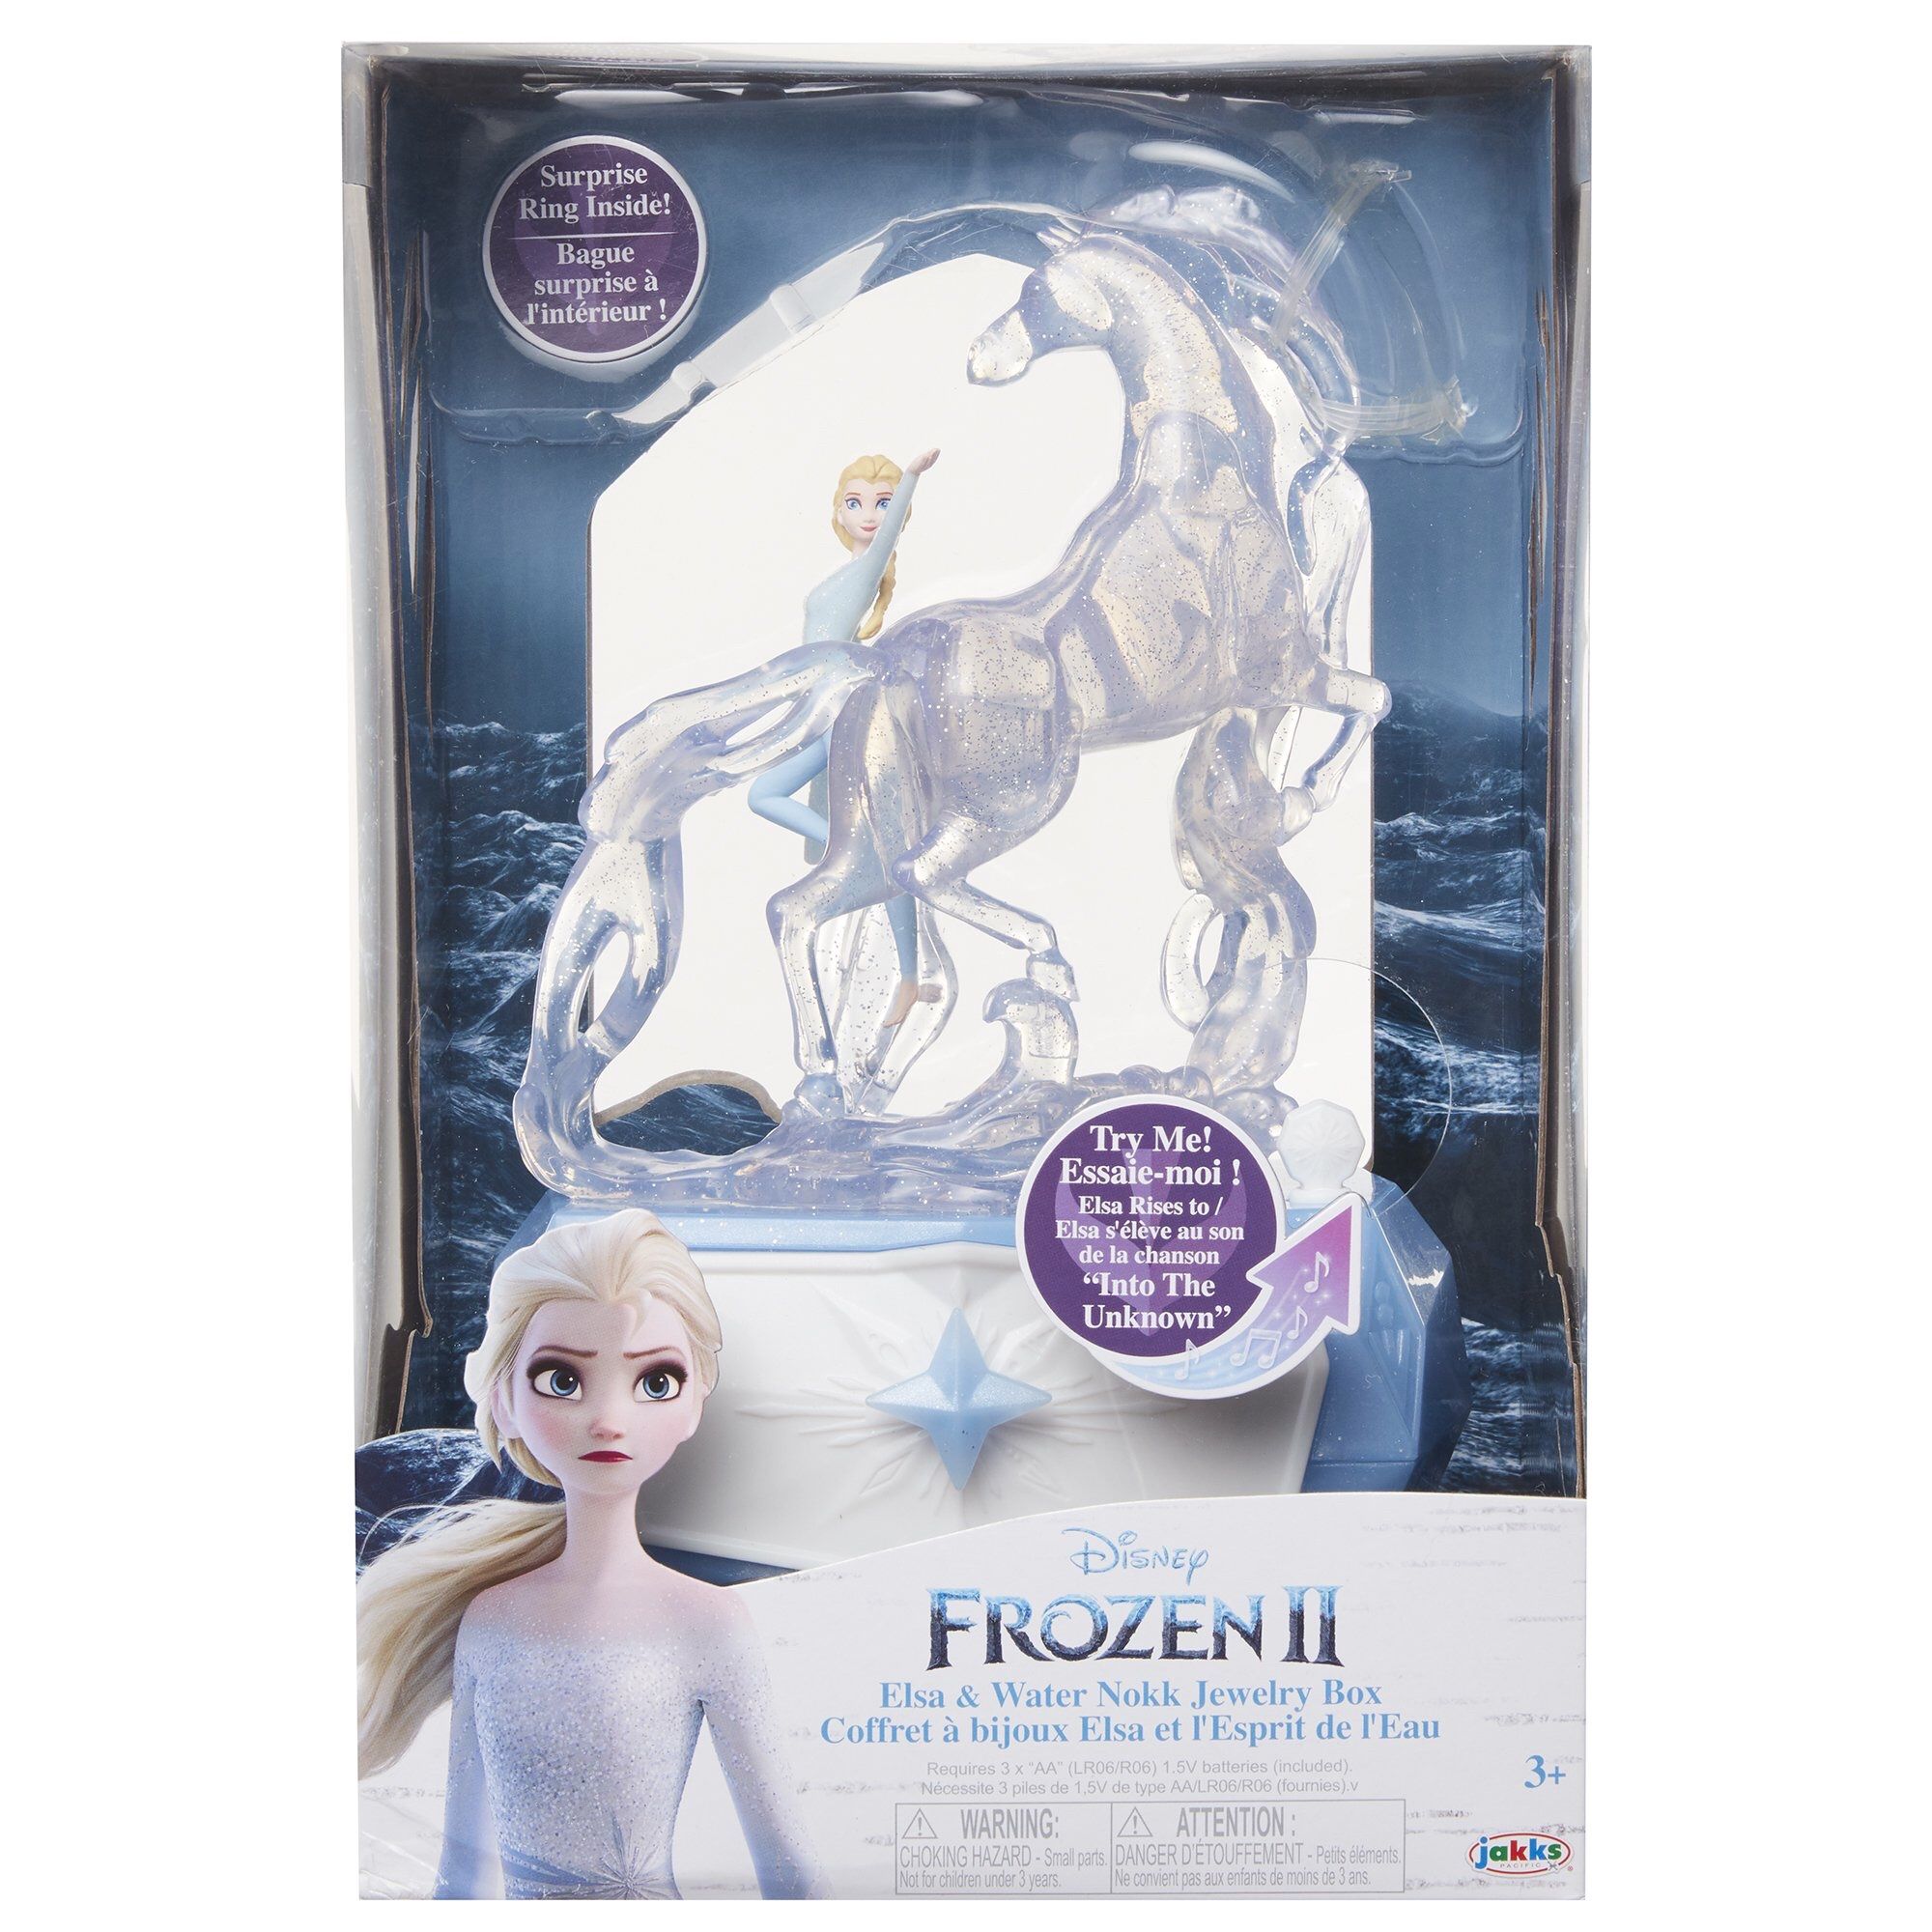 Disney Frozen 2 Elsa & Water Nokk Jewelry Box with Snowflake Ring, Color Changing Light, Plays “Into the Unknown”